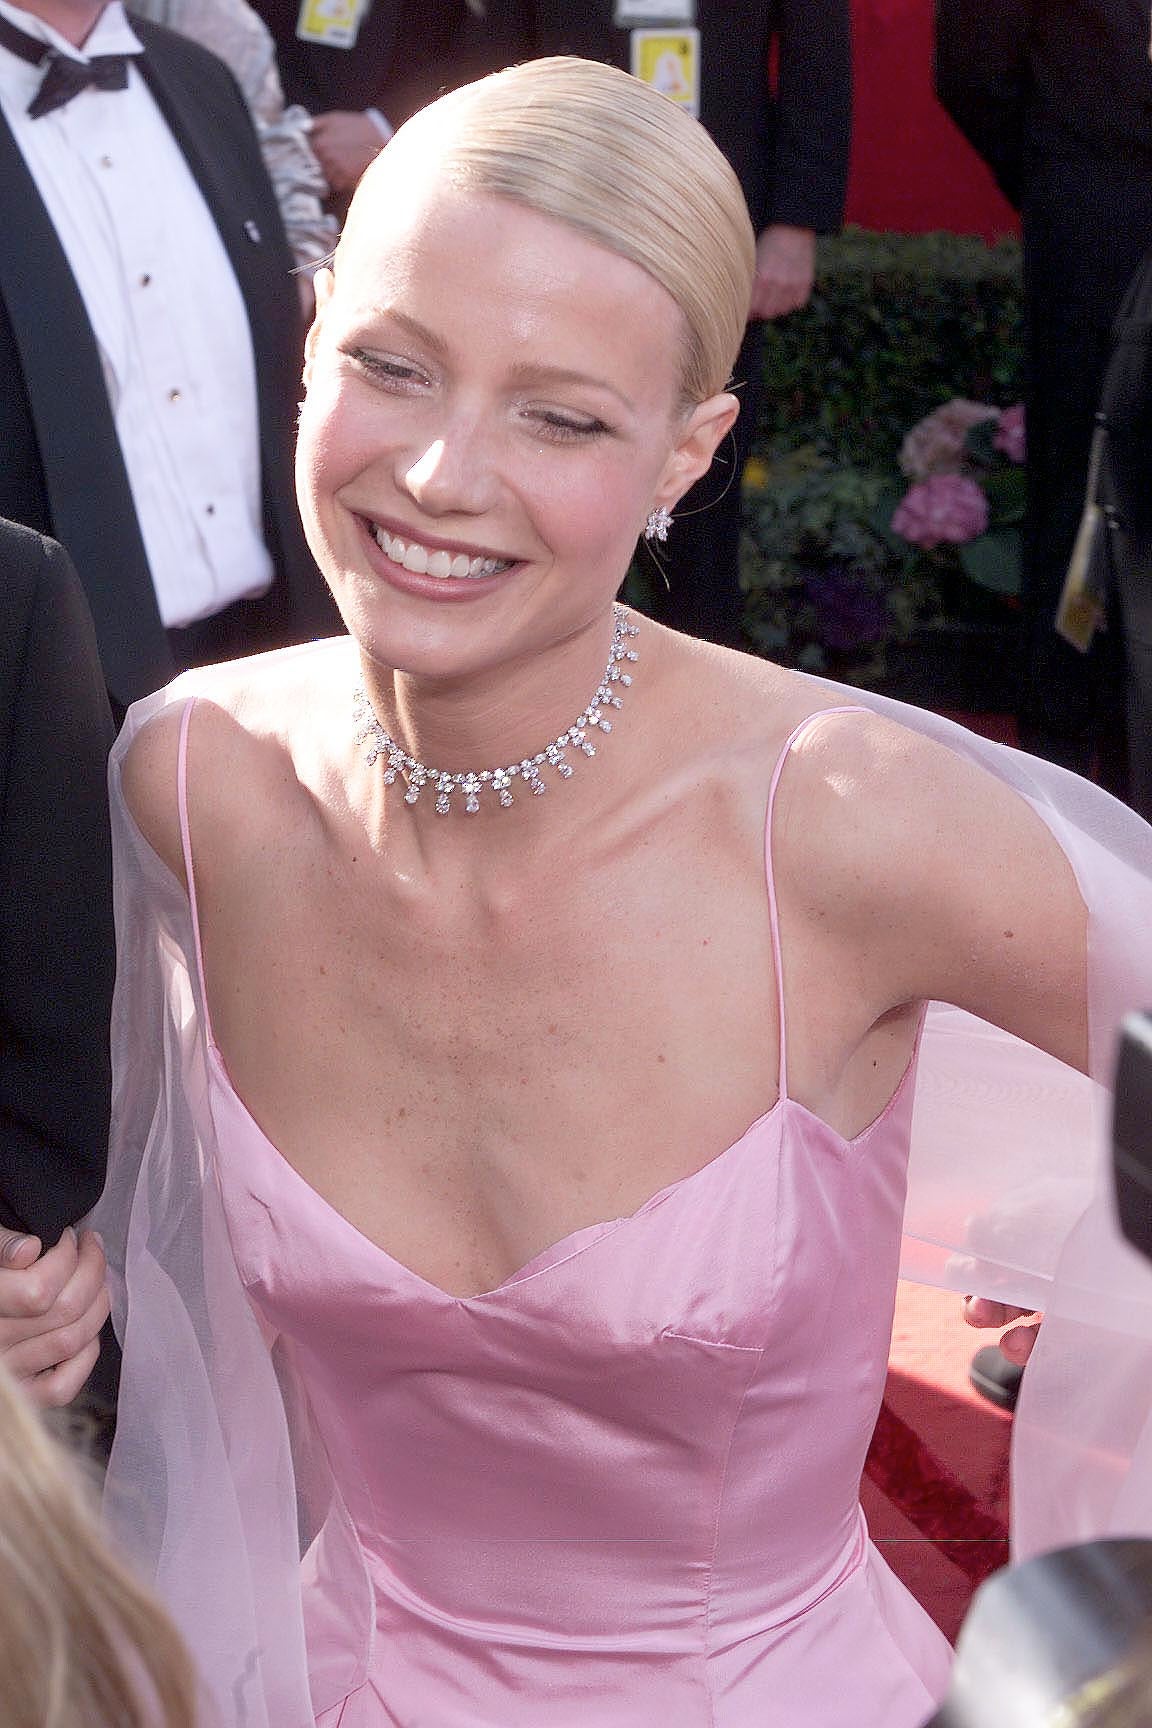 Paltrow at the 1999 Academy Awards, where she would go on to win Best Actress